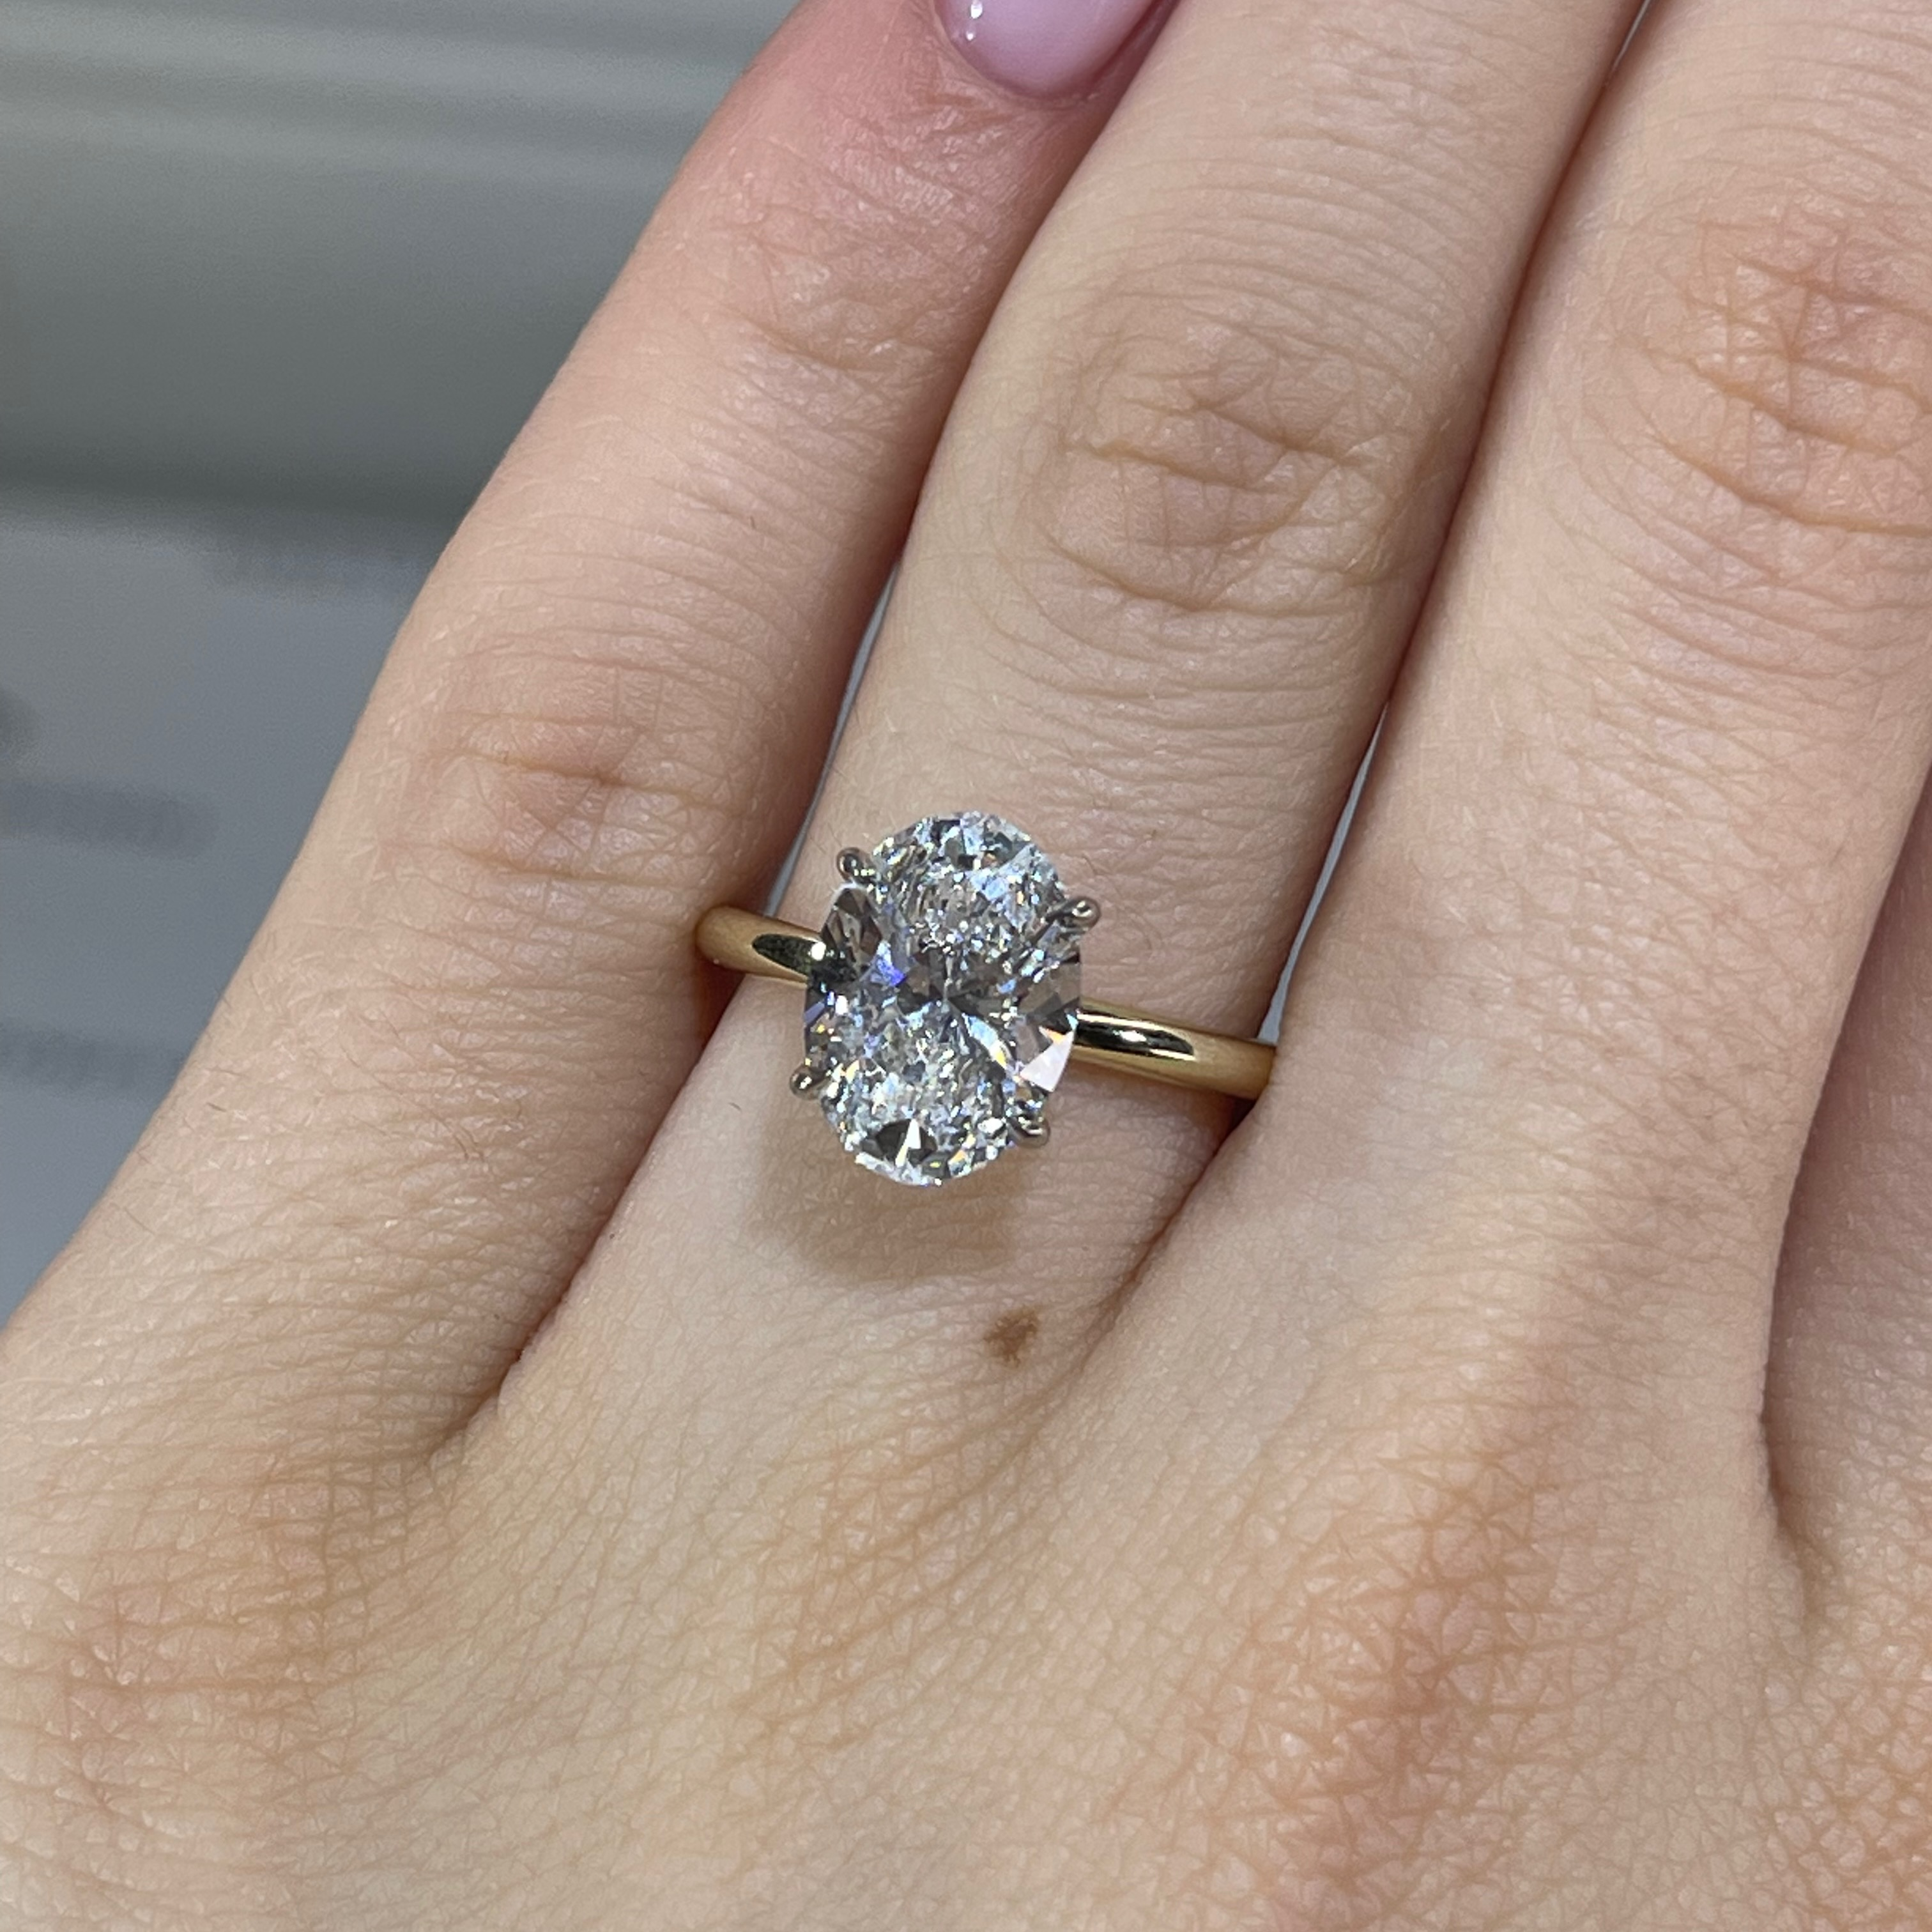 How Much Does A Custom Ring Setting Cost? - Diamonds Ltd